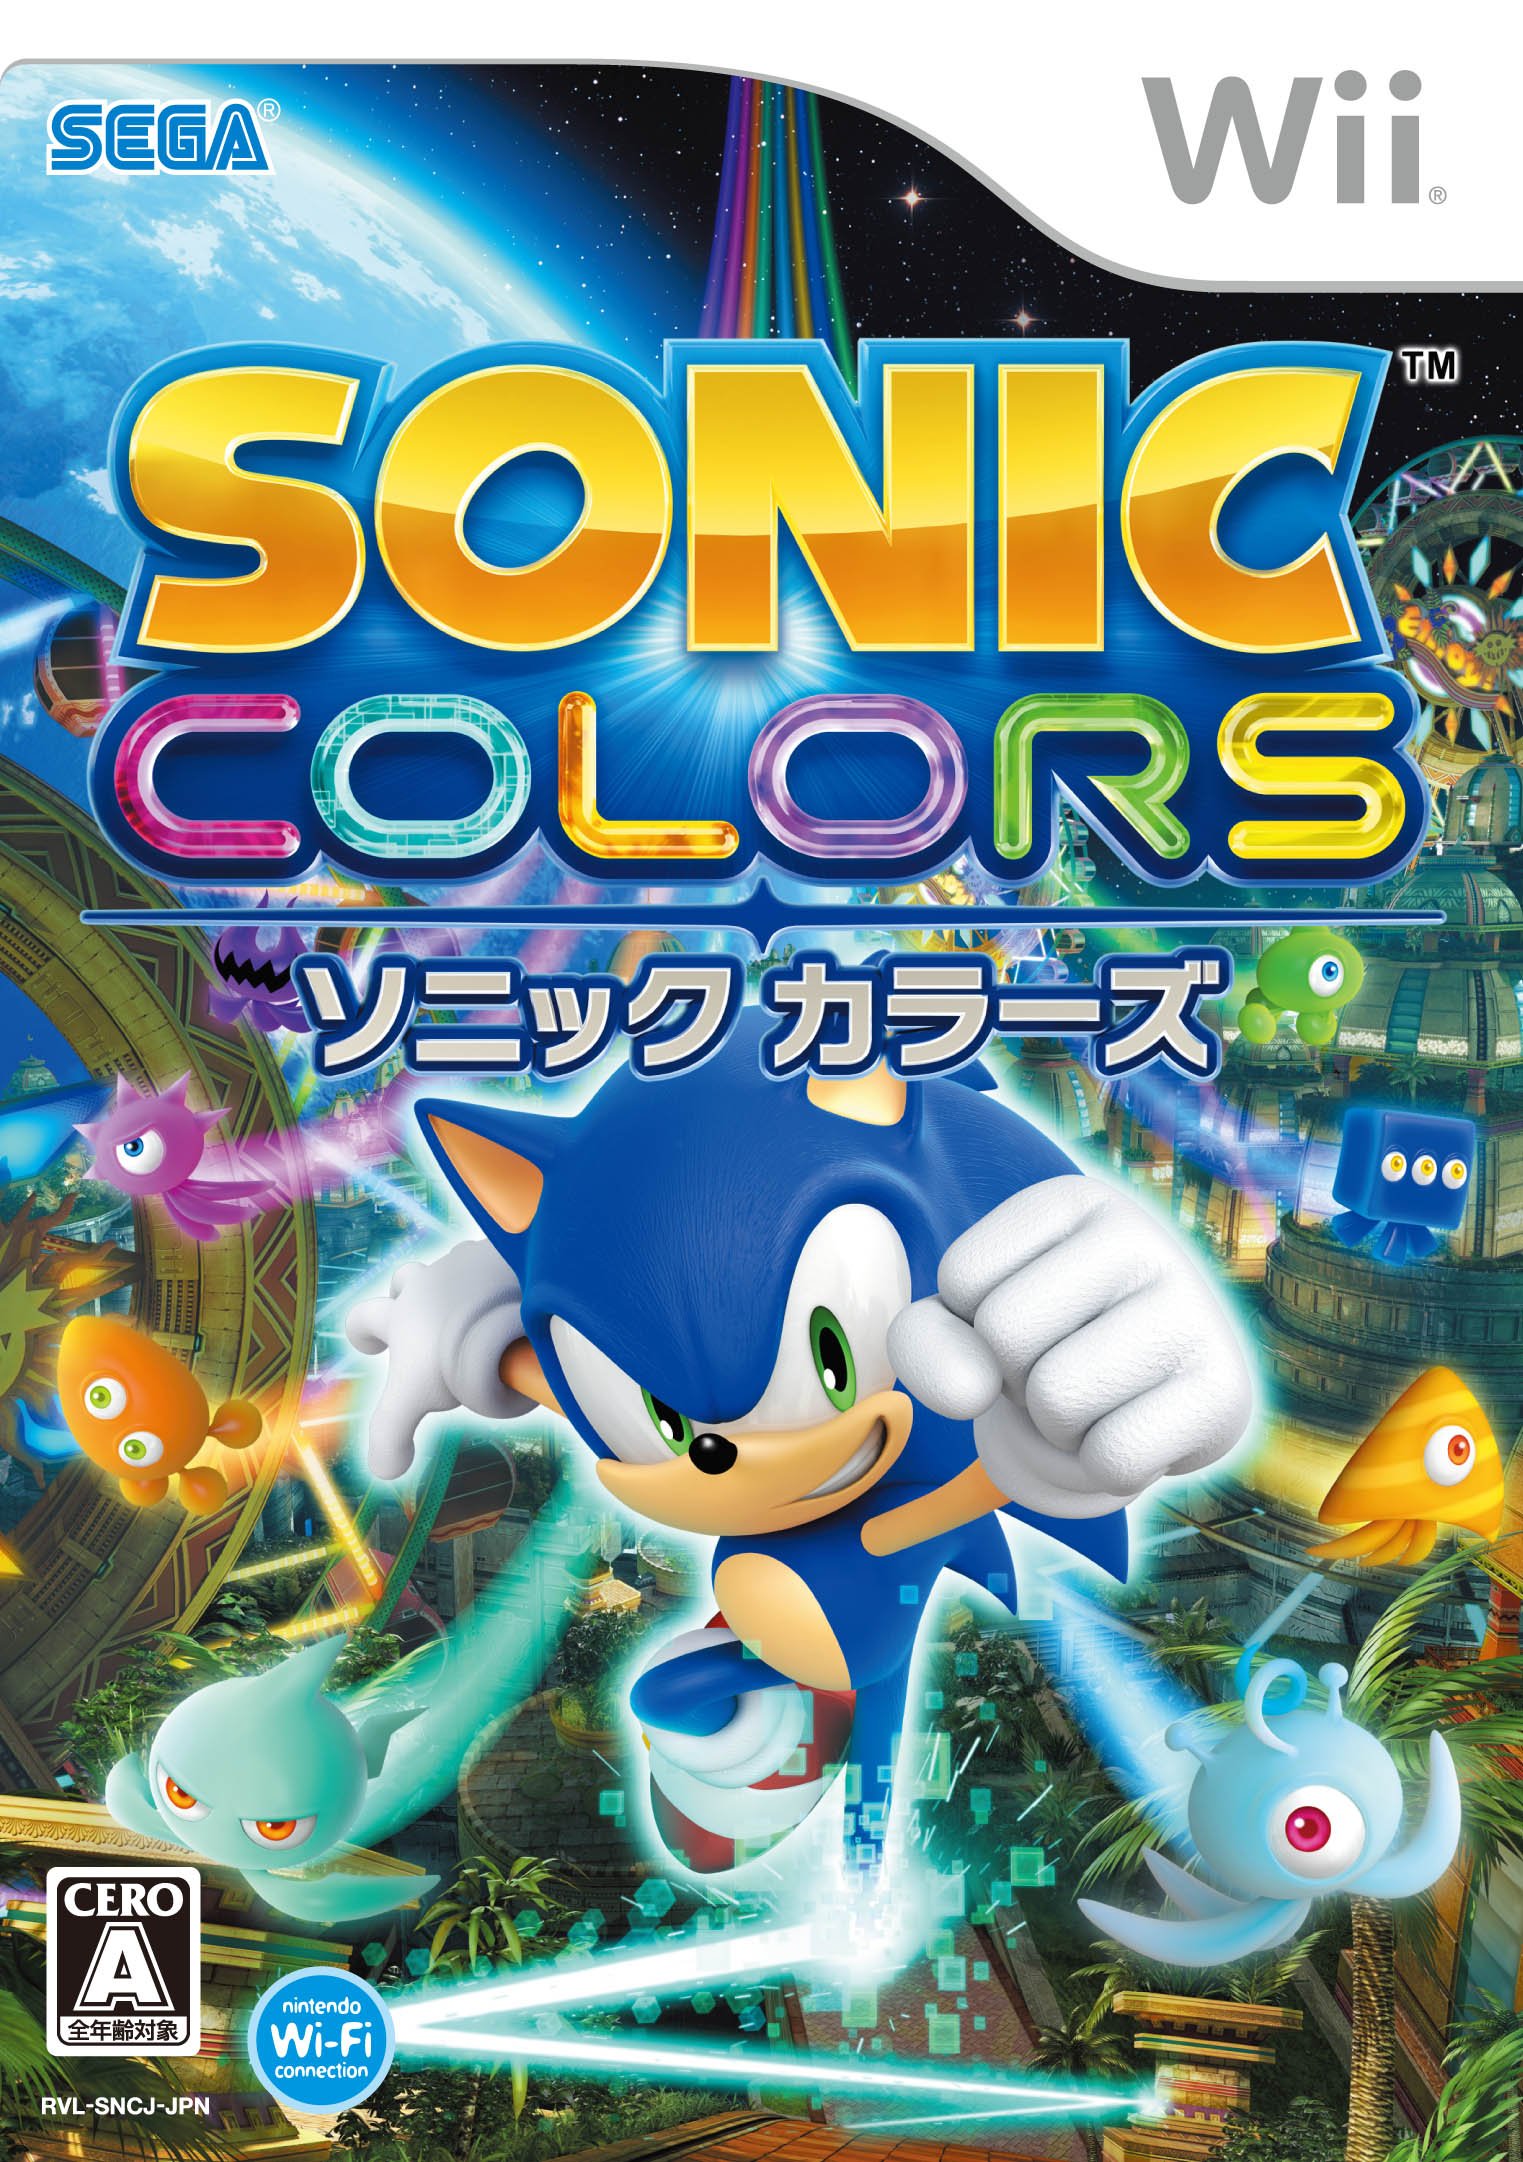 Sonic Colours Ultimate (English) for PlayStation 4